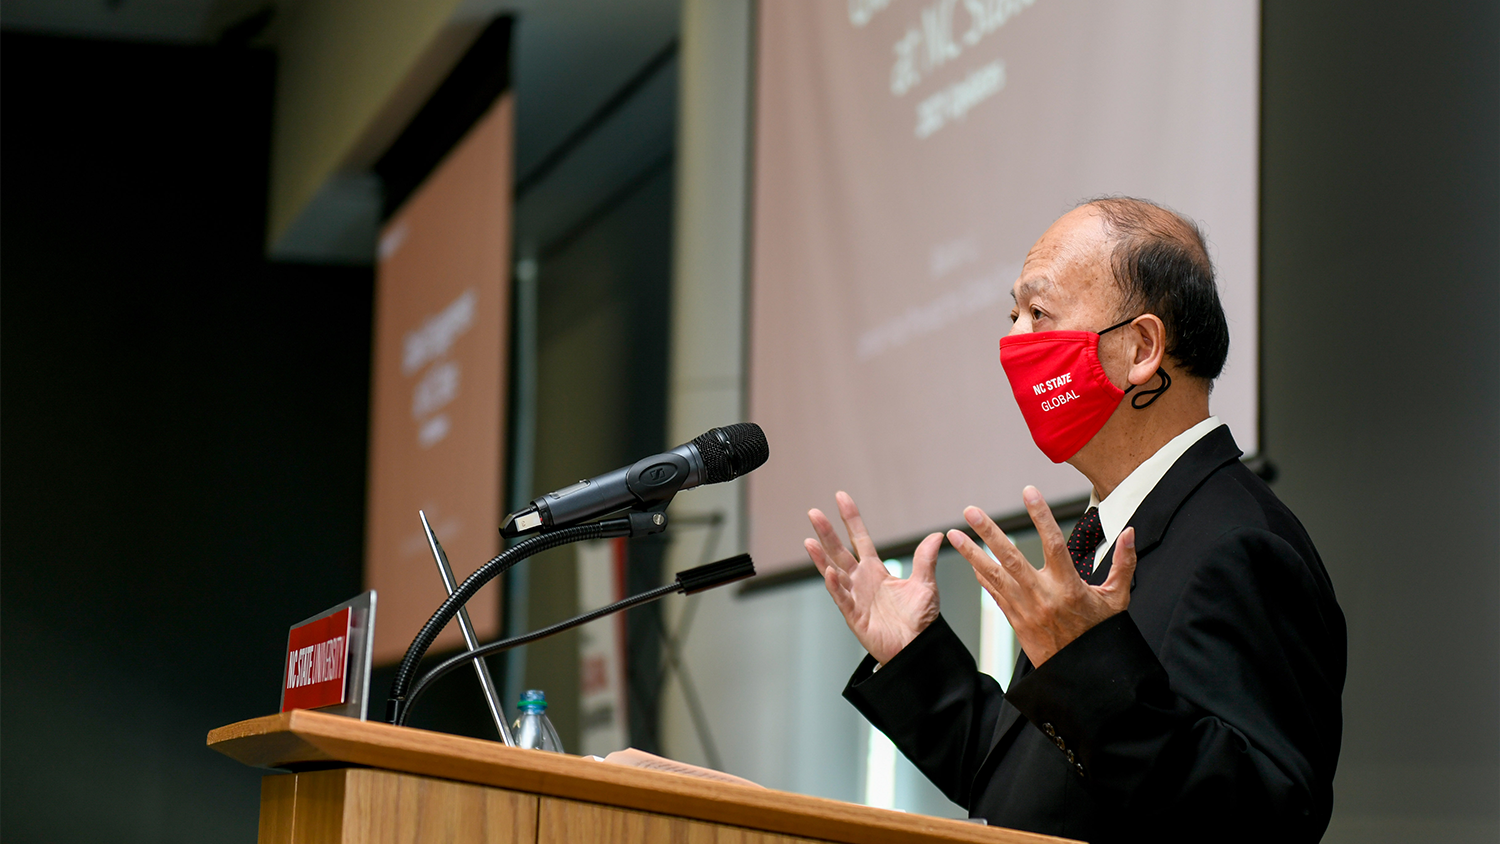 A man with a mask on giving a speech at a podium in front of a big screen.